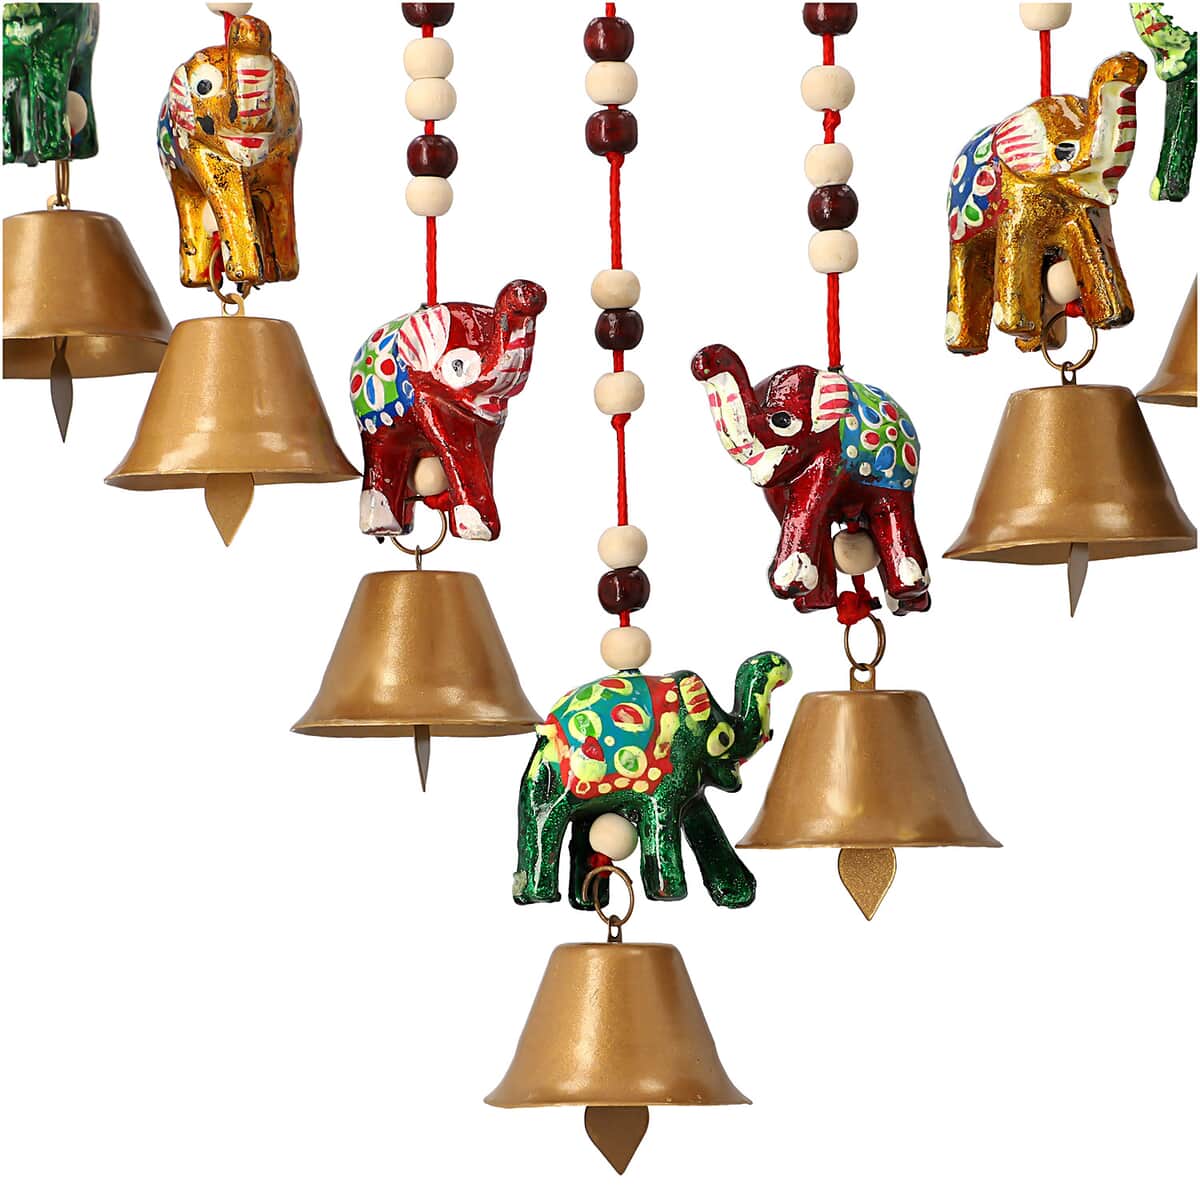 Set of 2 Handcrafted Wooden Elephant Wind Chime and Big Iron bell image number 4